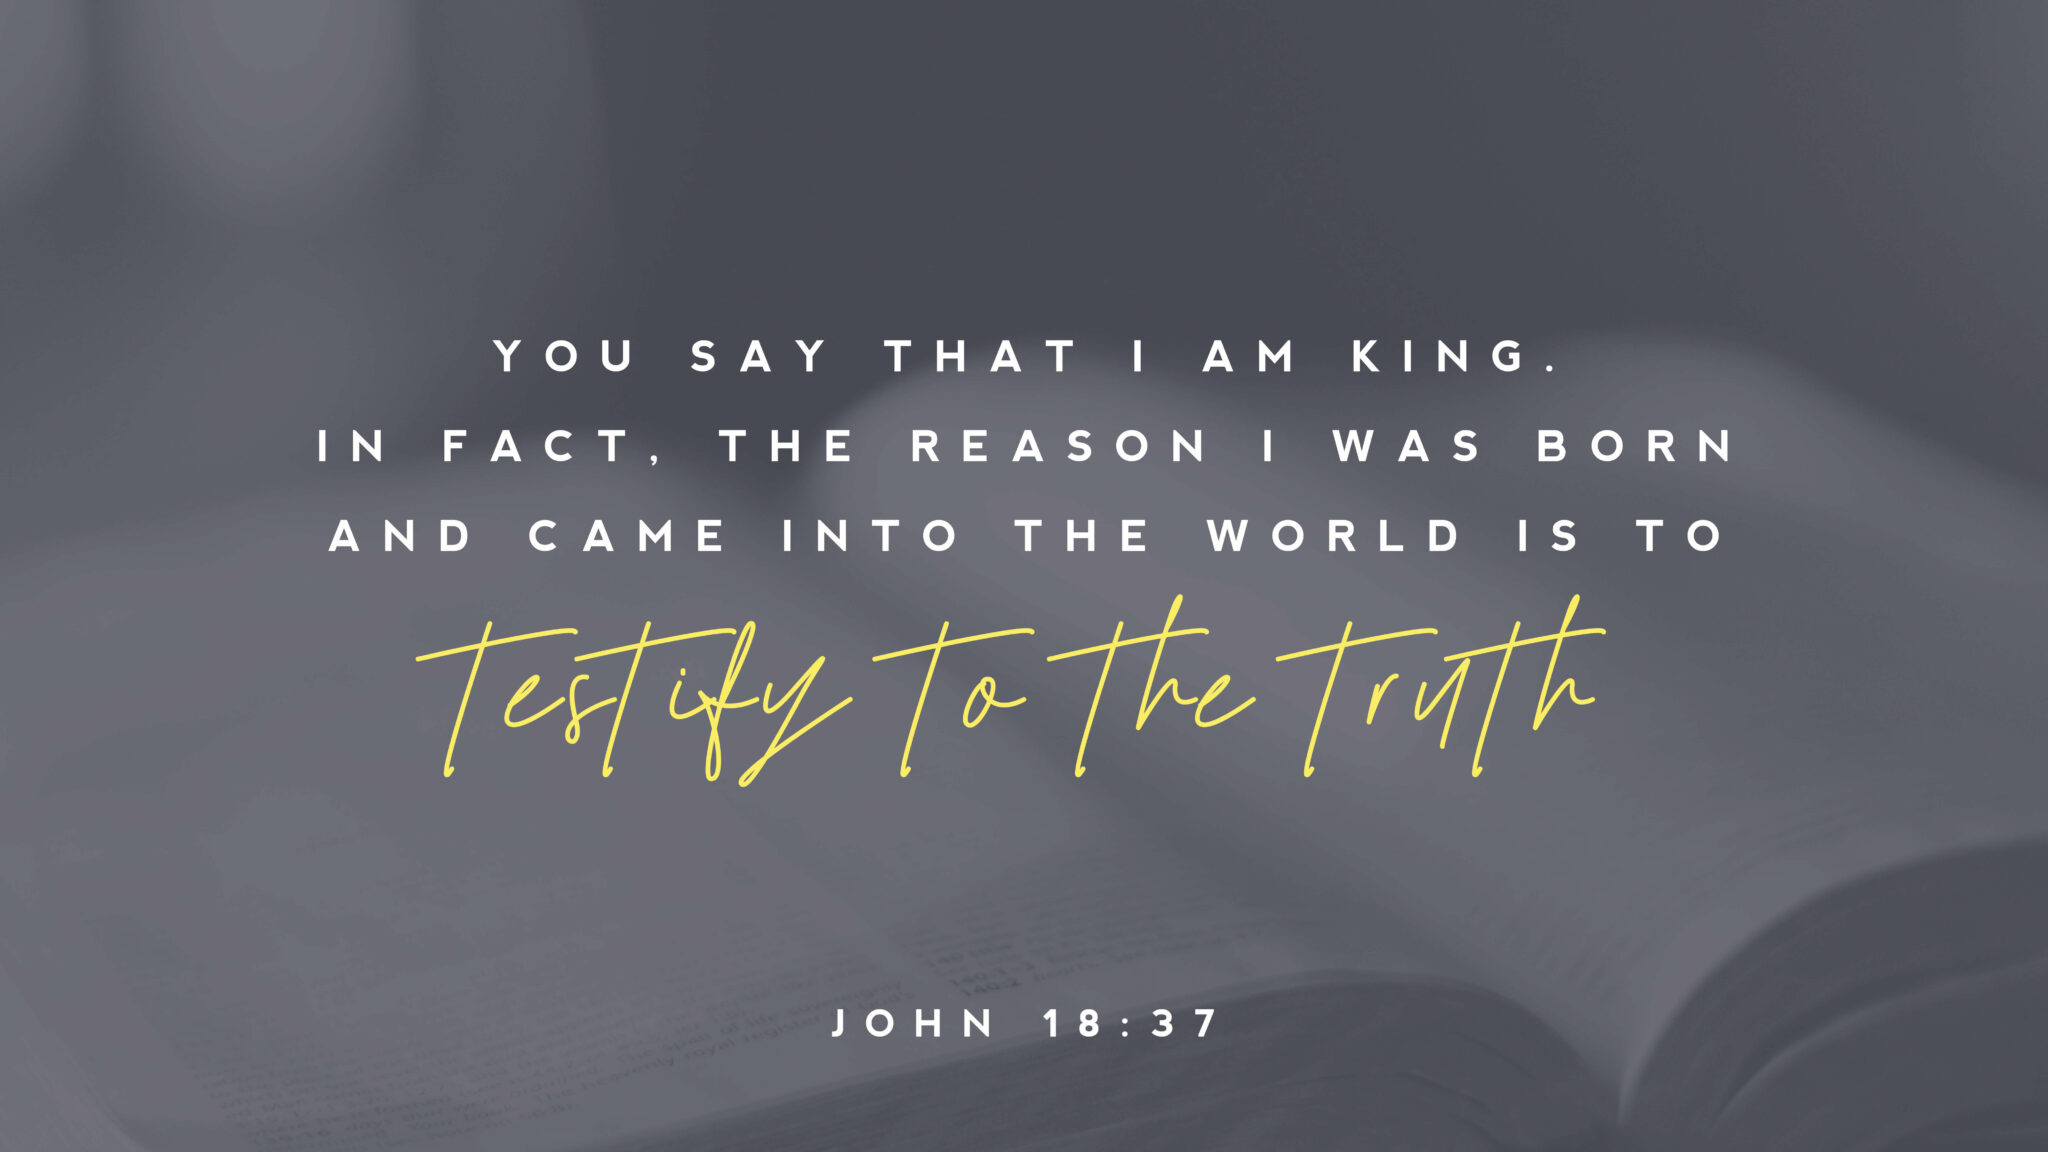 "You say that I am King. In fact, the reason I was born and came into the world is to testify to the truth" (John 18:37)